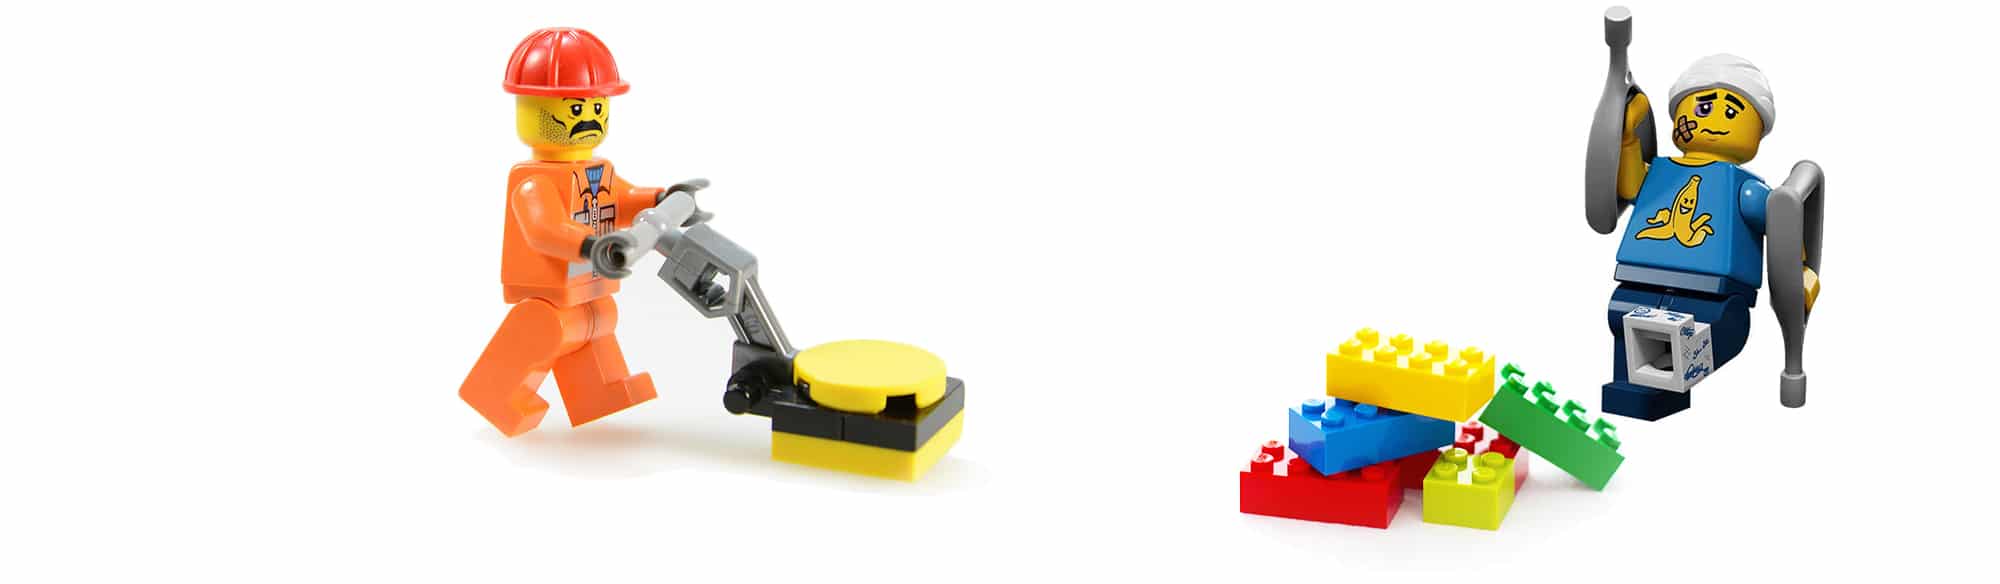 An injured adult Lego character that stepped onto Lego bricks and got injured. A Lego cleaner is going to pick the Lego bricks off of the ground for safety.